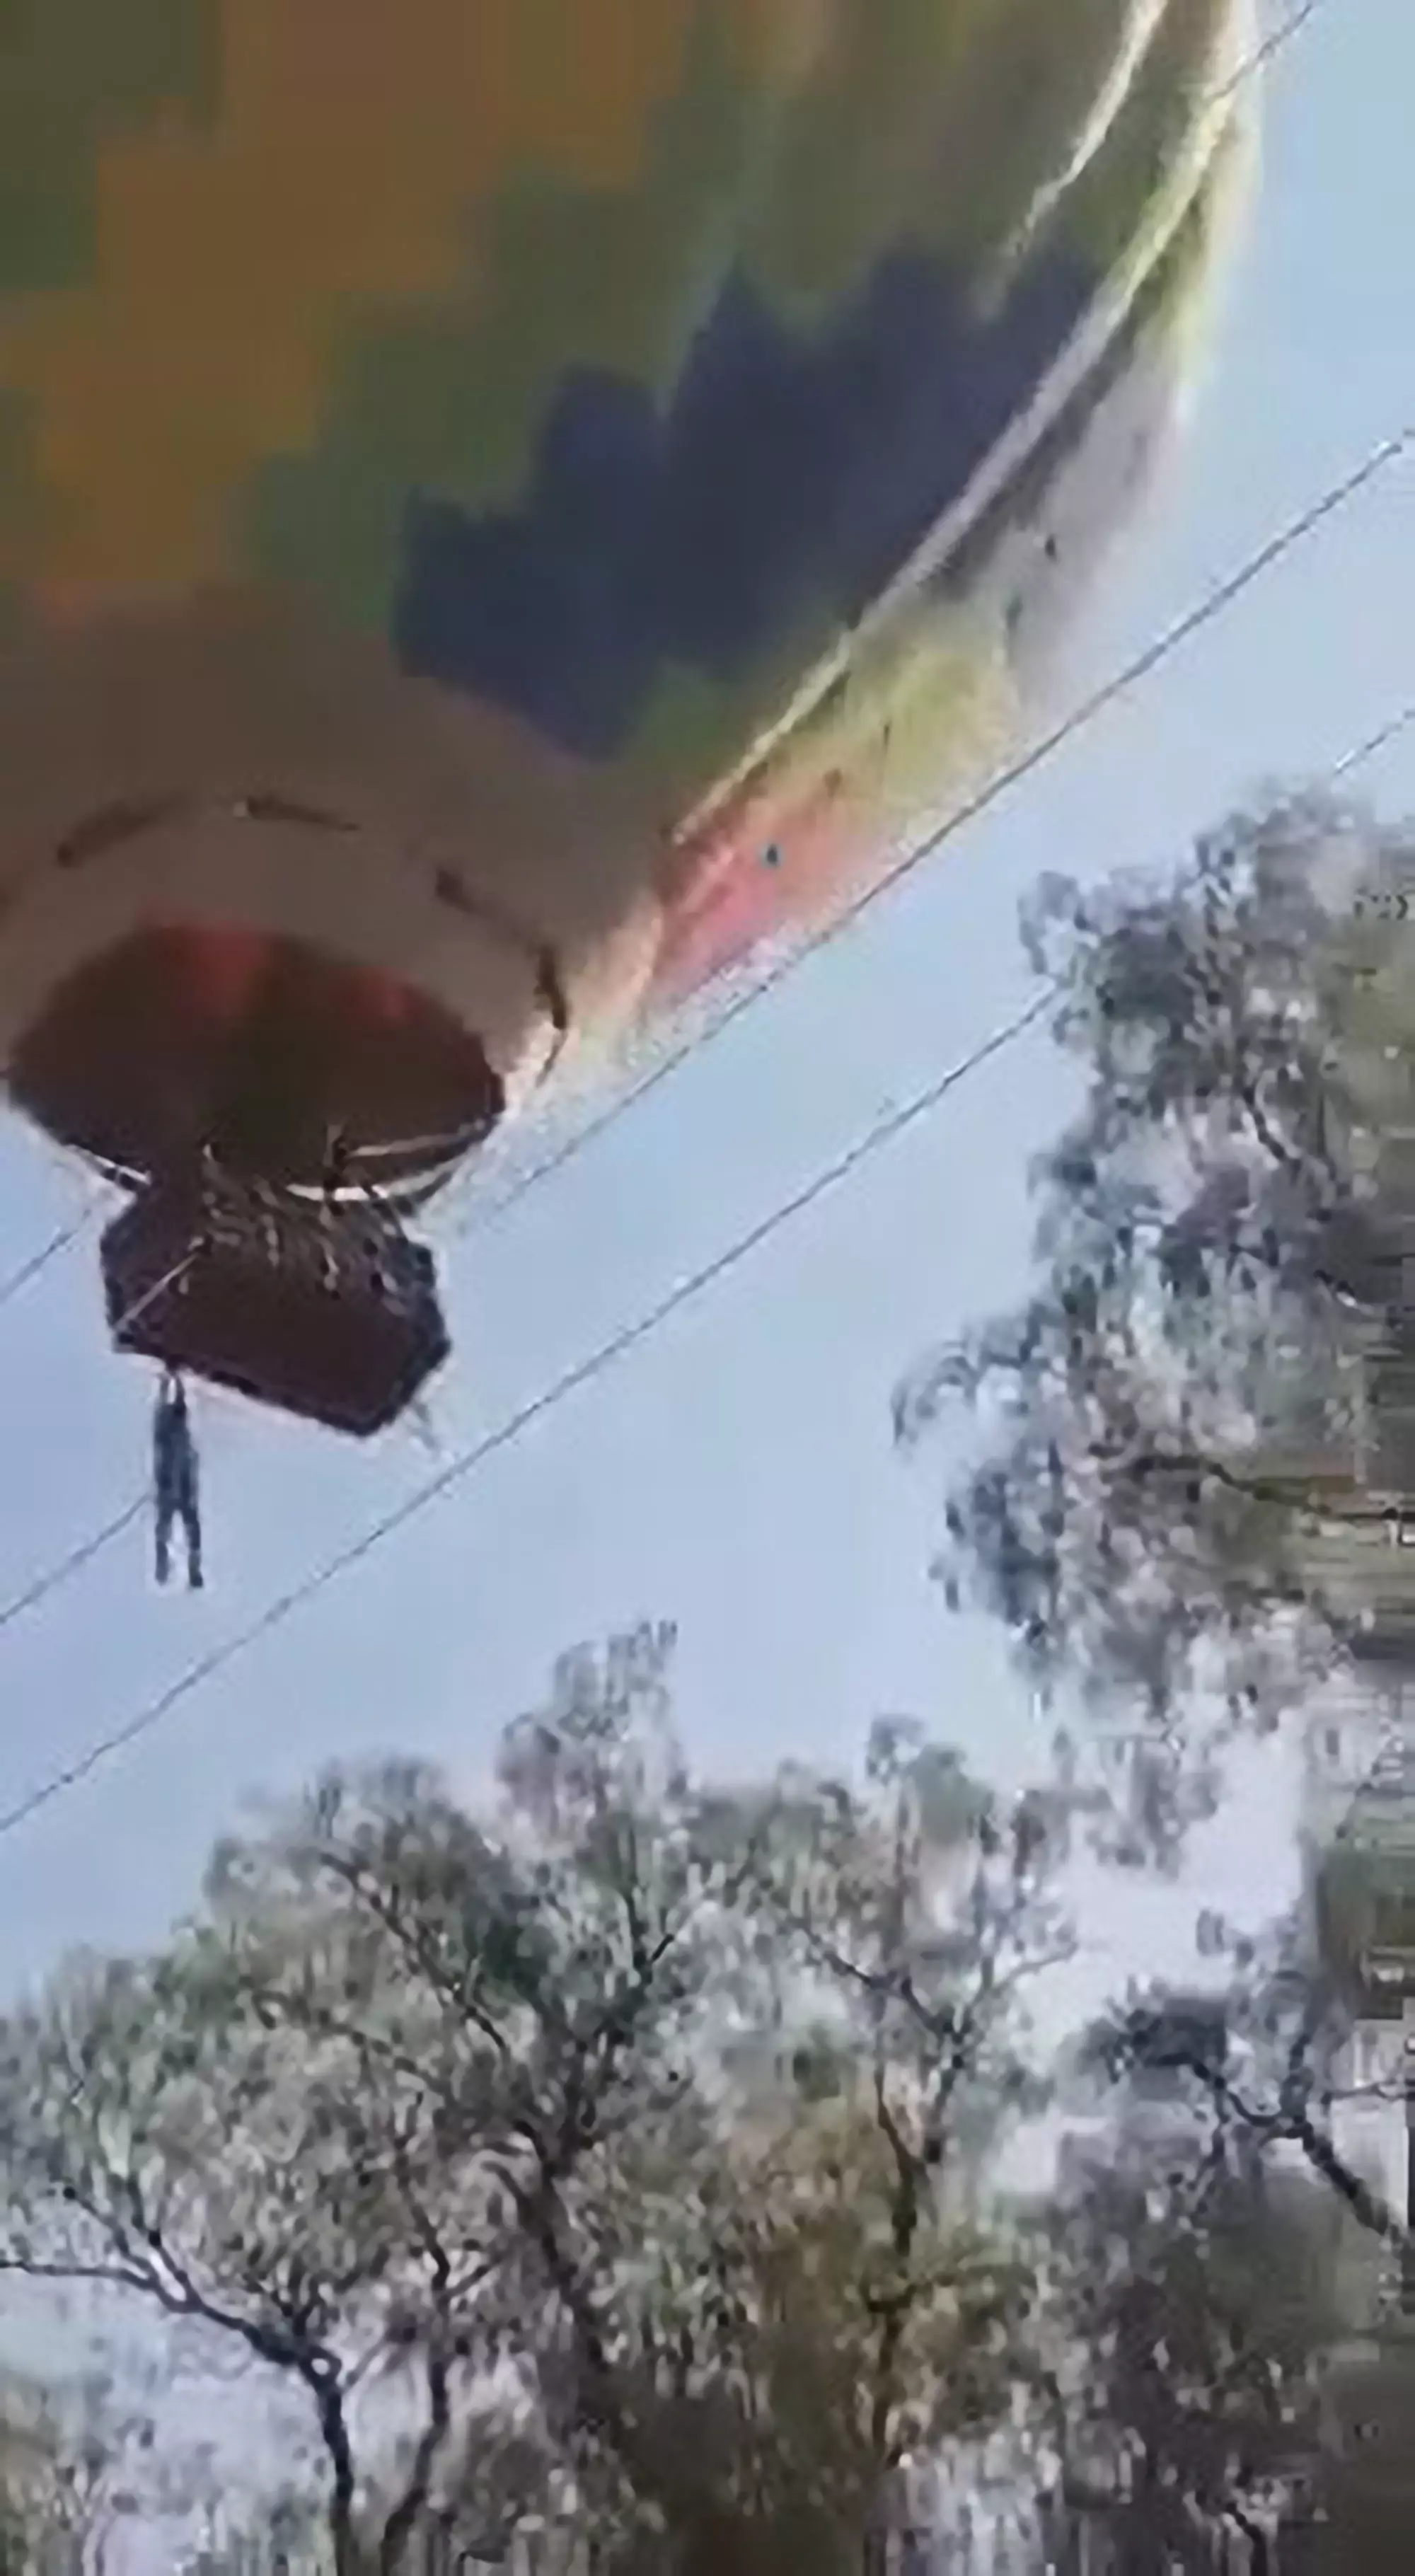 Onlookers urged him to 'hold on' as he hung suspended in the air.